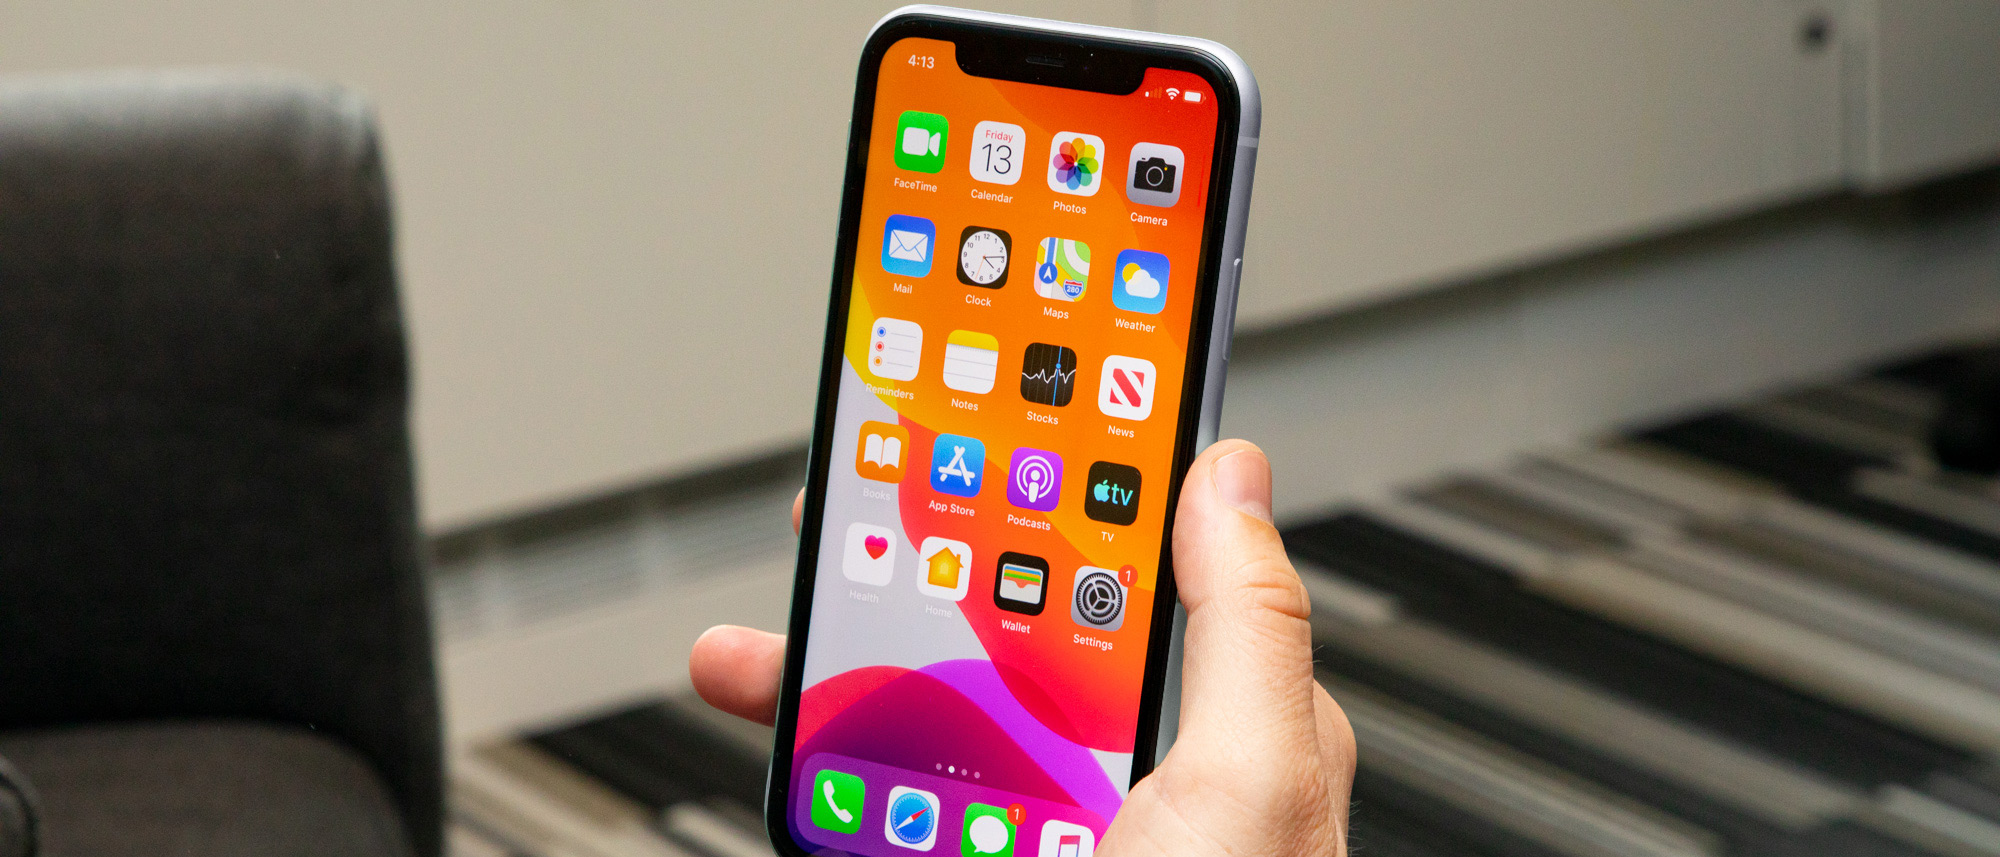 iPhone 11 review: this is still one of Apple's top models | TechRadar